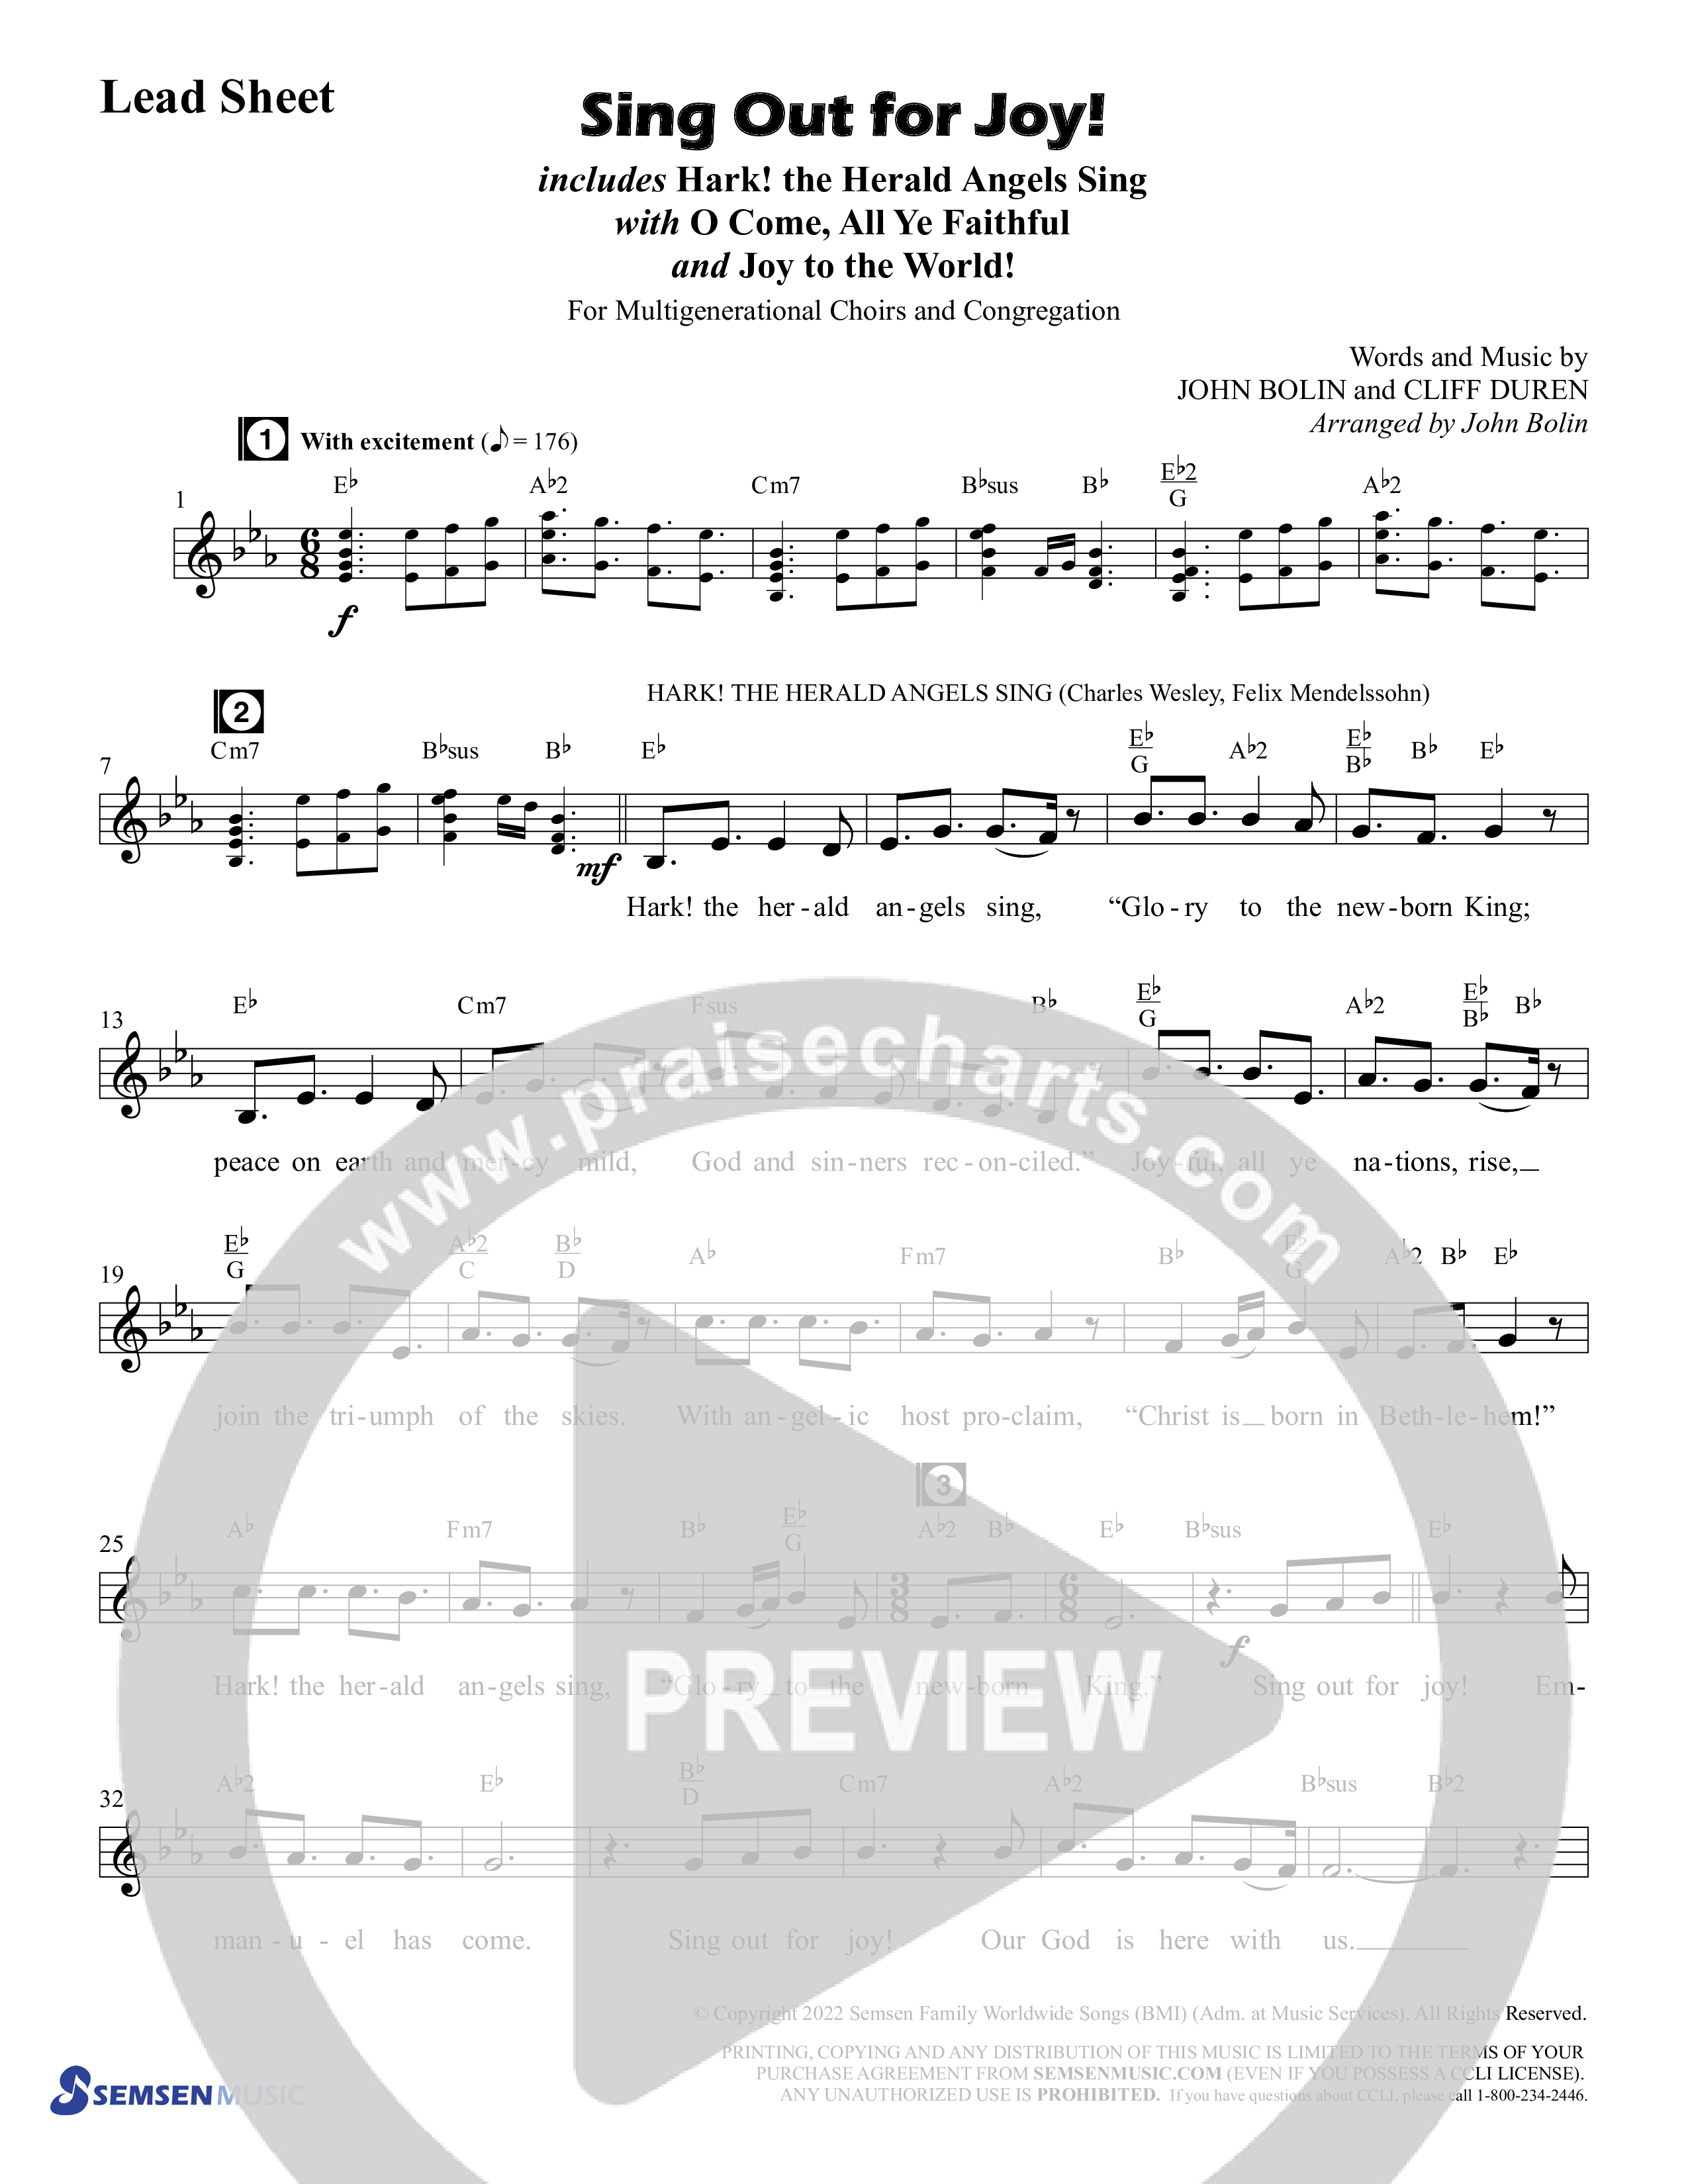 Sing Out For Joy (Choral Anthem SATB) Chords & Lead Sheet (Semsen Music / Arr. John Bolin / Orch. Cliff Duren)